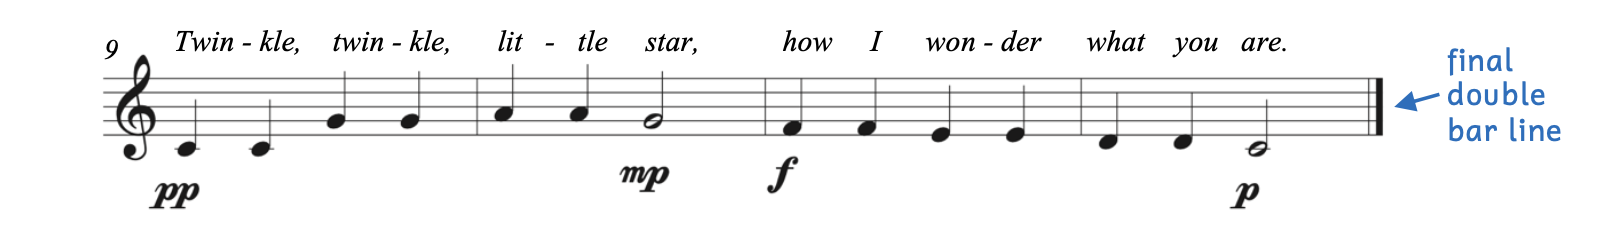 "Twinkle Twinkle Little Star" with added dynamics beginning at measure 9. The example begins pianissimo and by the end of measure 10 is mezzopiano. Measure 11 begins forte and the end of measure 12 is piano. There is a final double bar line that concludes this example.